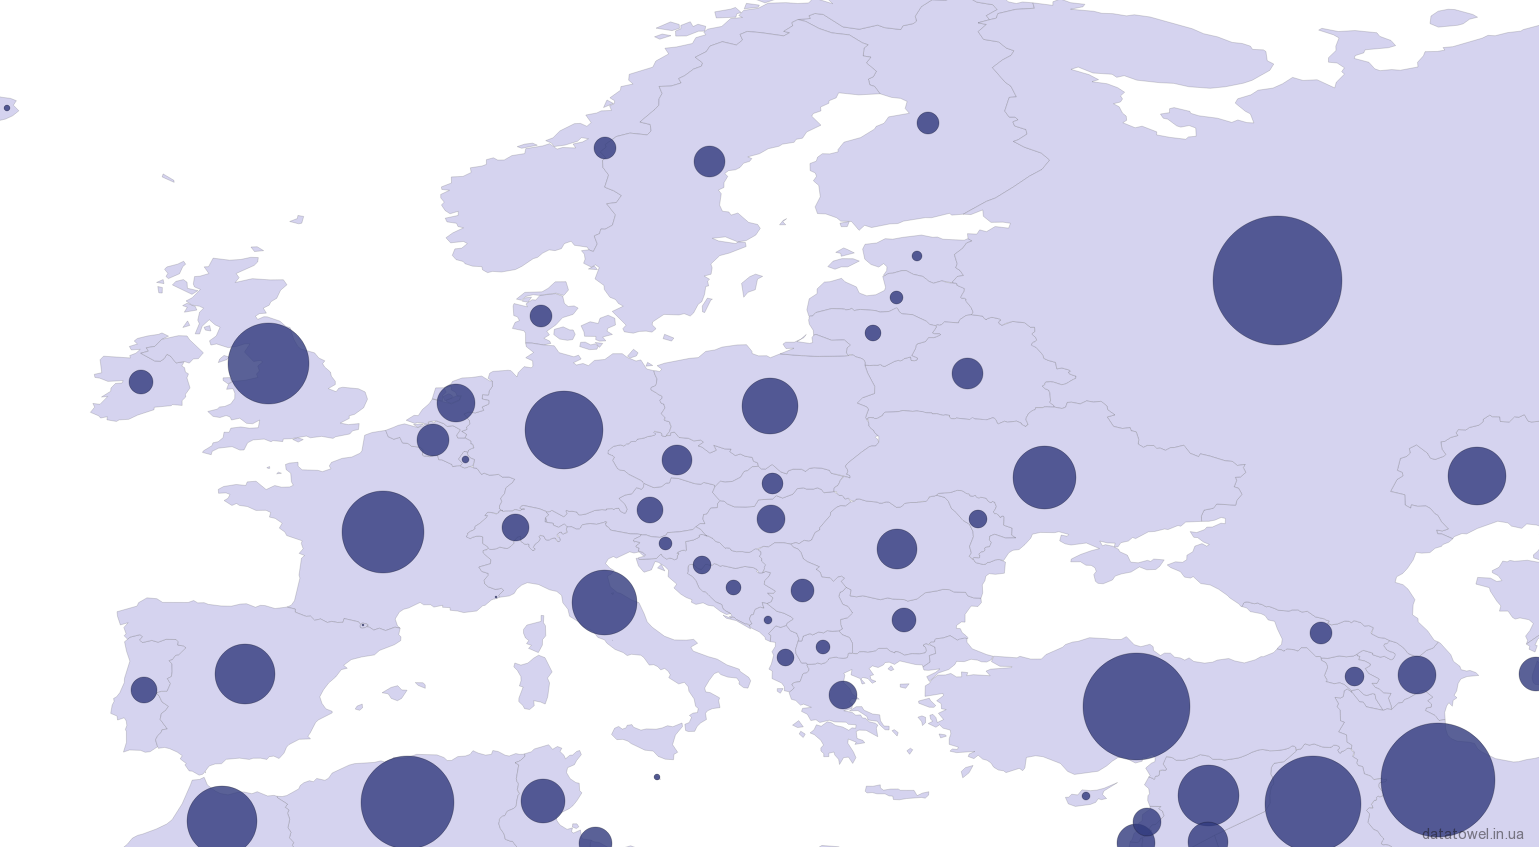 European countries by number of live births in 2014